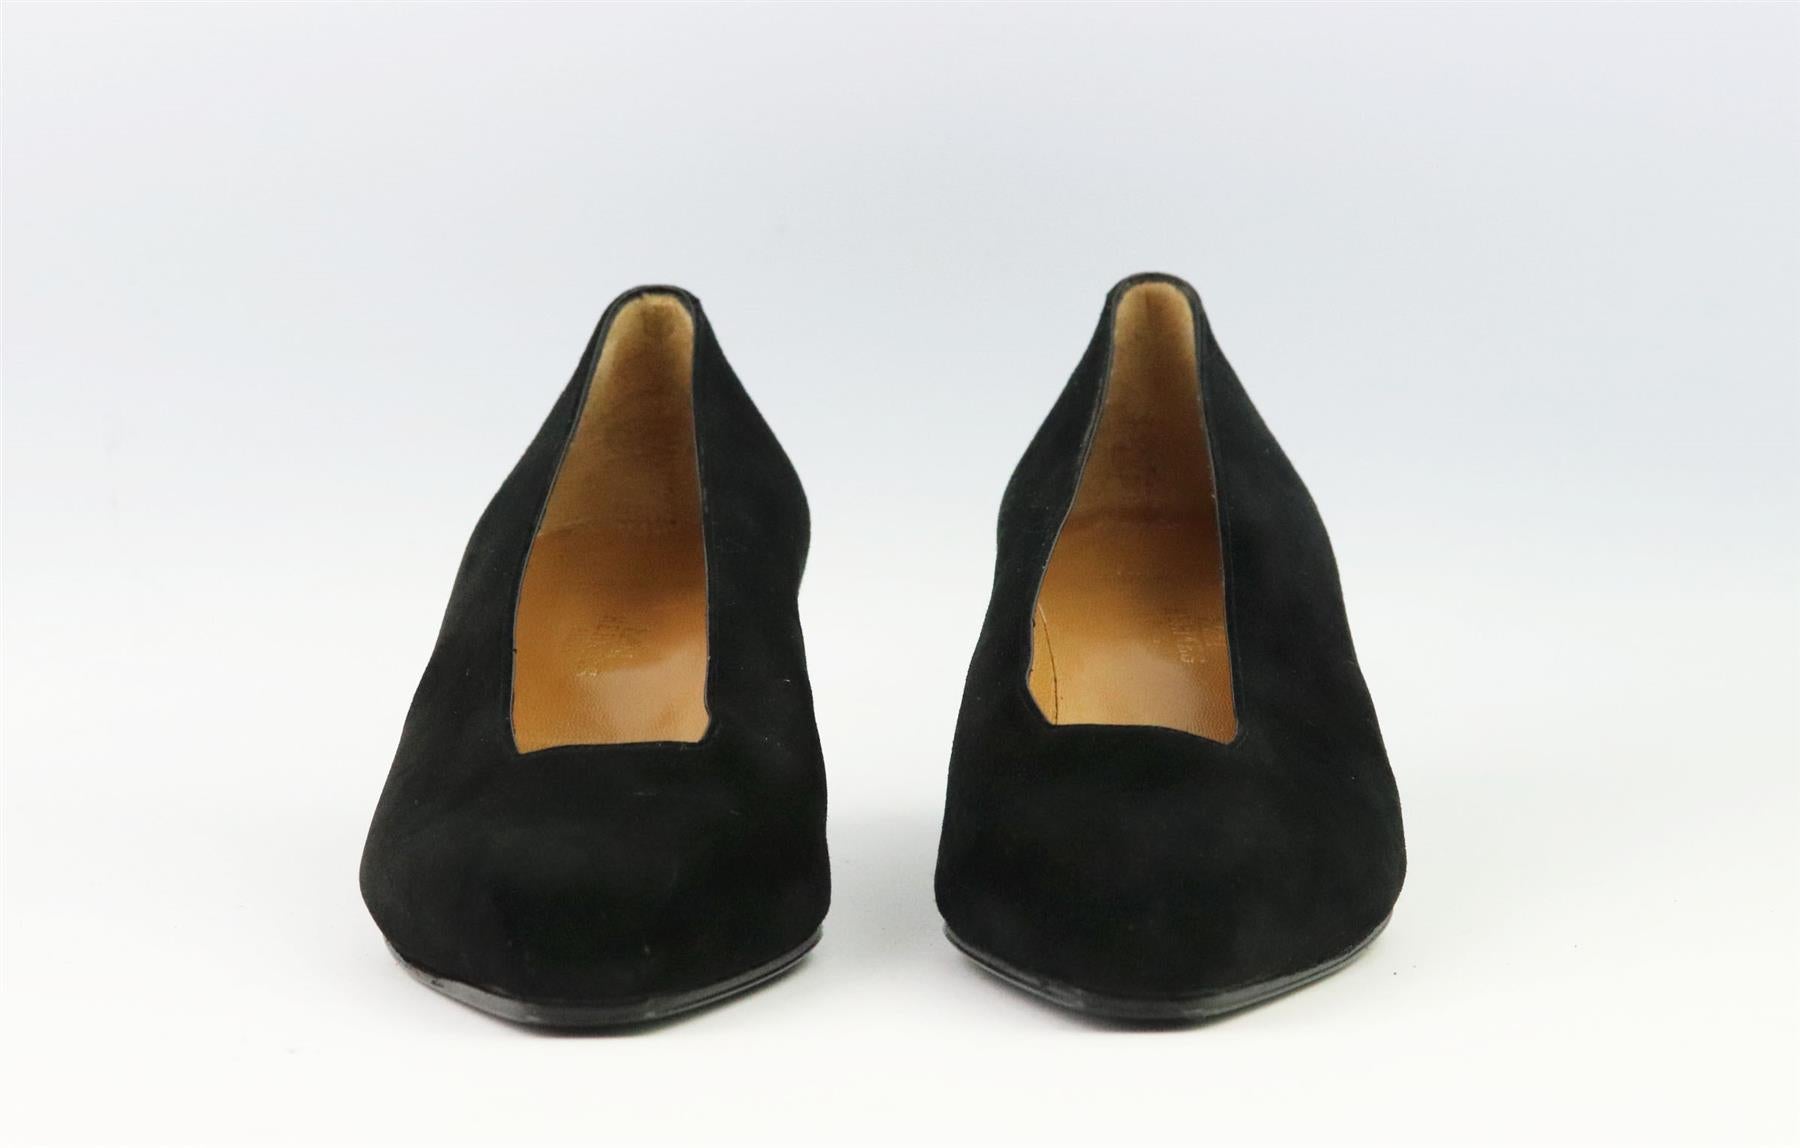 These vintage pumps by Hermès are a classic style that will never date, made in Italy from supple suede leather, they have almond toes and square shape to take you from morning meetings to dinner with friends. Heel measures approximately 63 mm/ 2.5